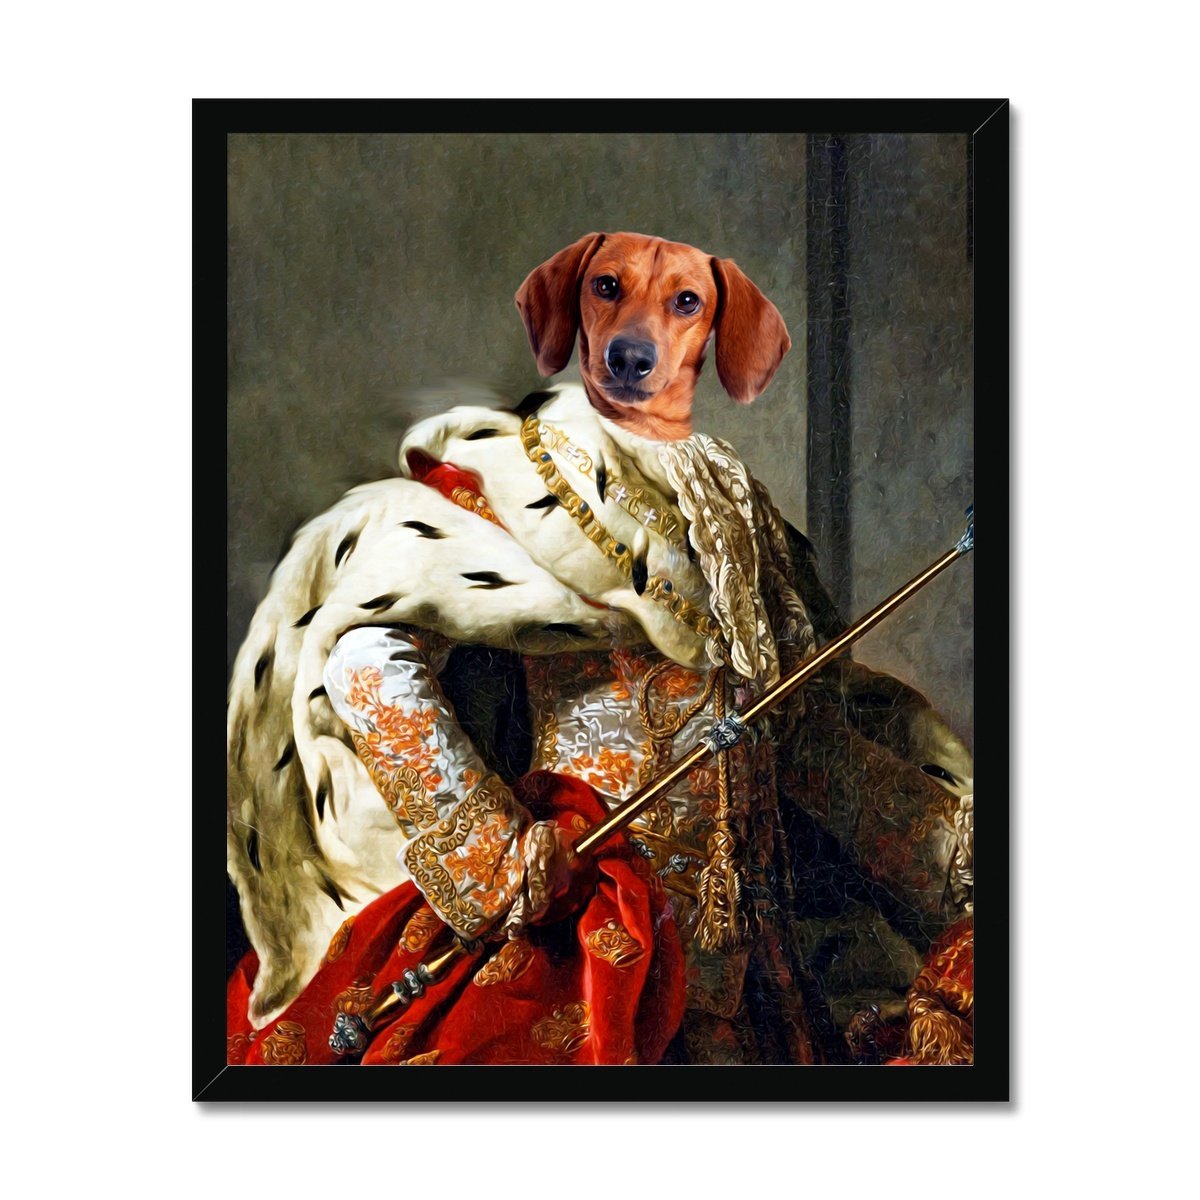 Paw & Glory, paw and glory, painting of your dog, dog portraits admiral, personalized pet and owner canvas, pet portrait singapore, digital pet paintings, dog portraits as humans, pet portrait